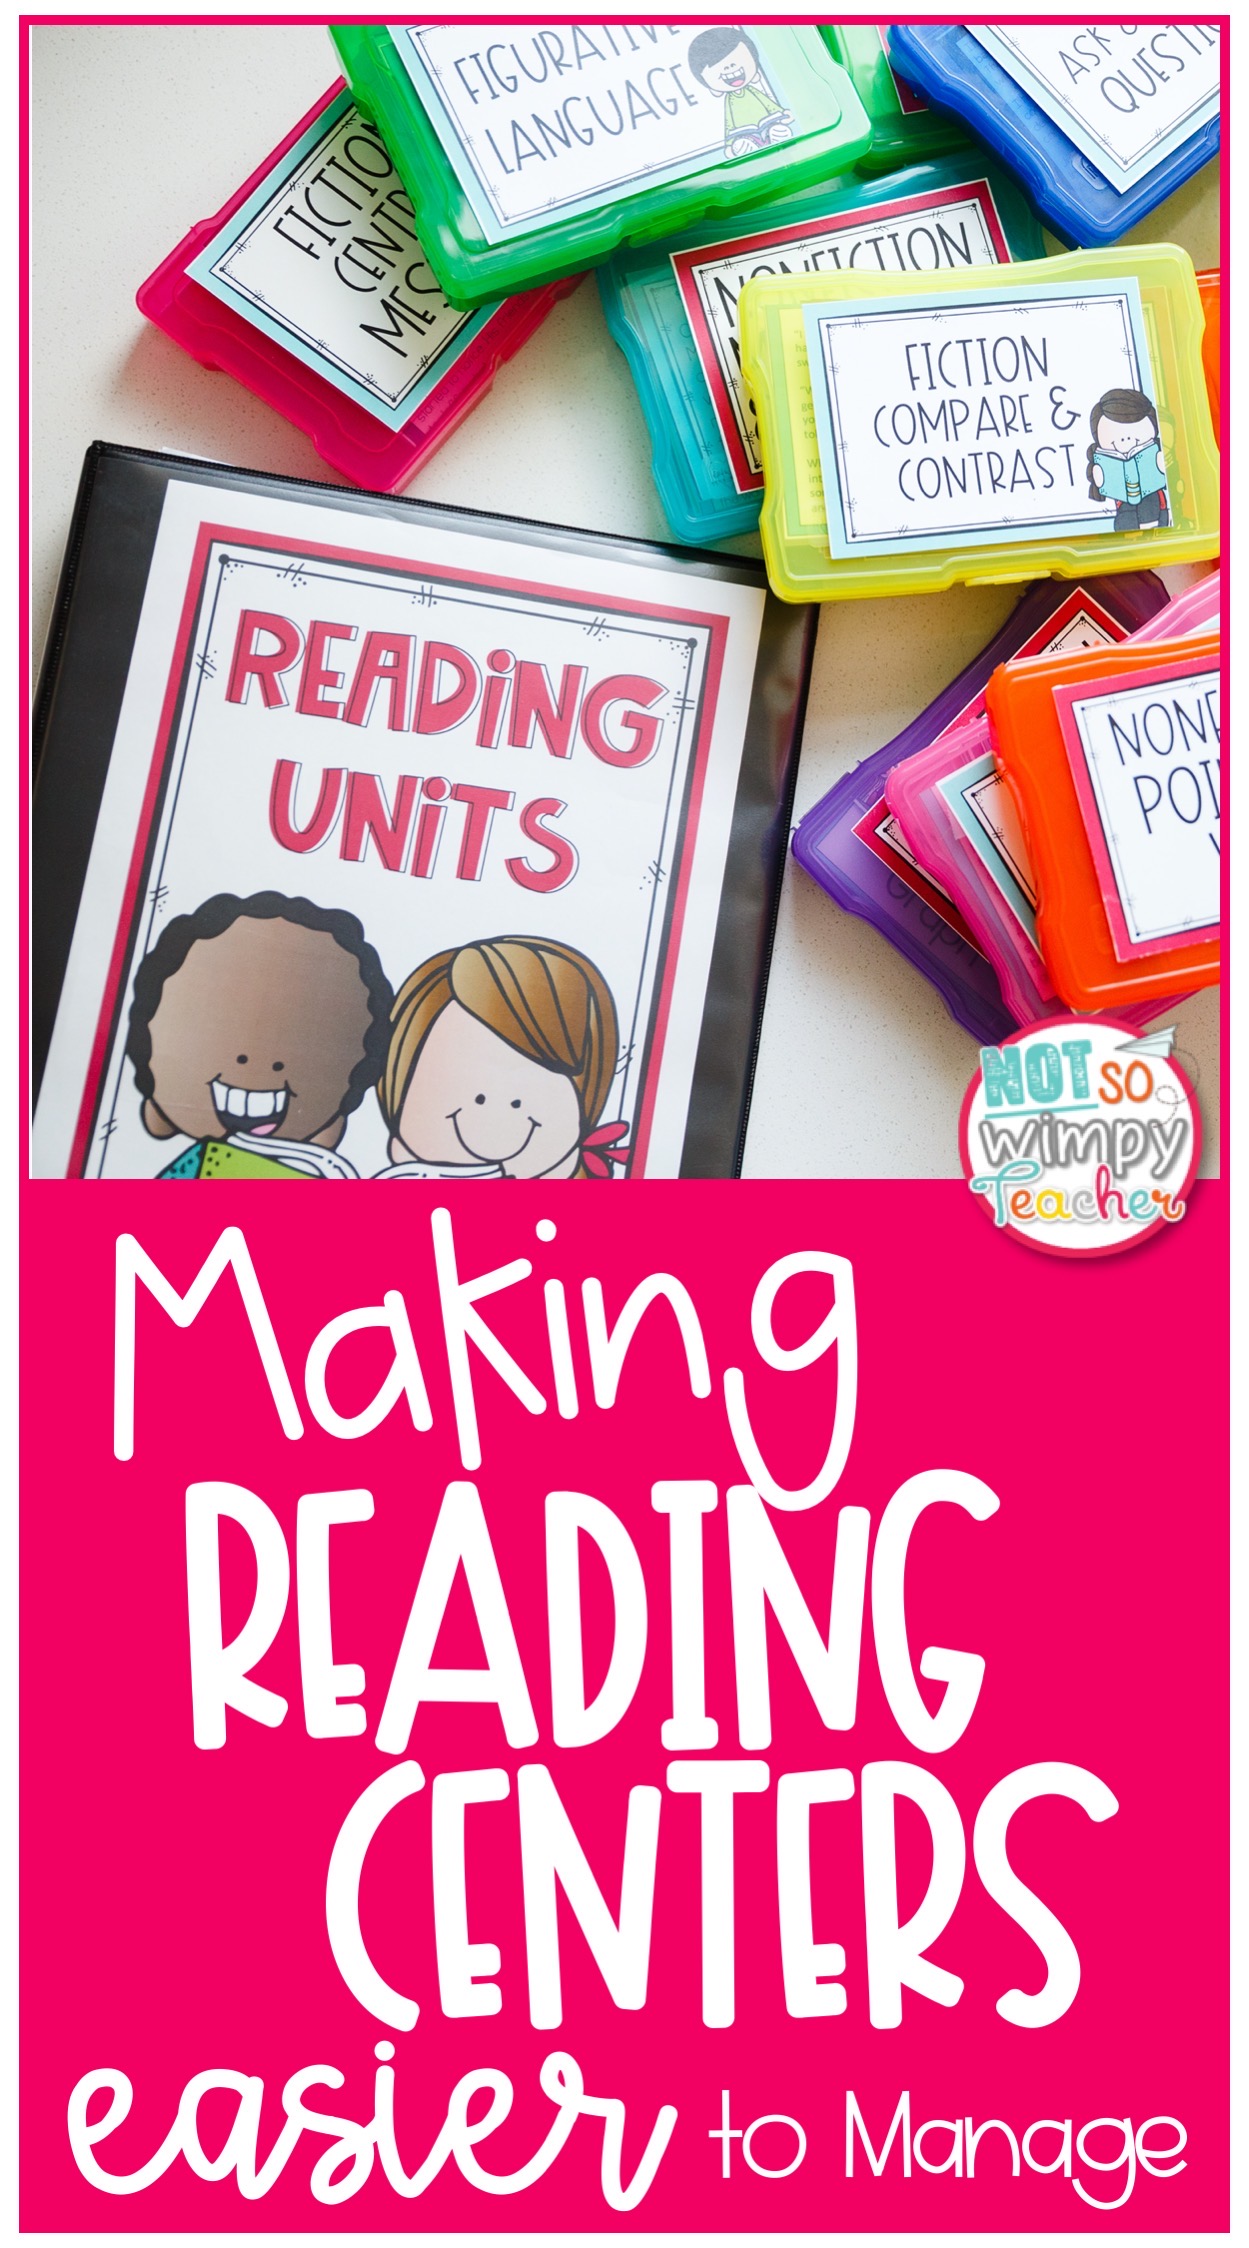 brightly colored boxed with text overlay making reading centers easier to manage